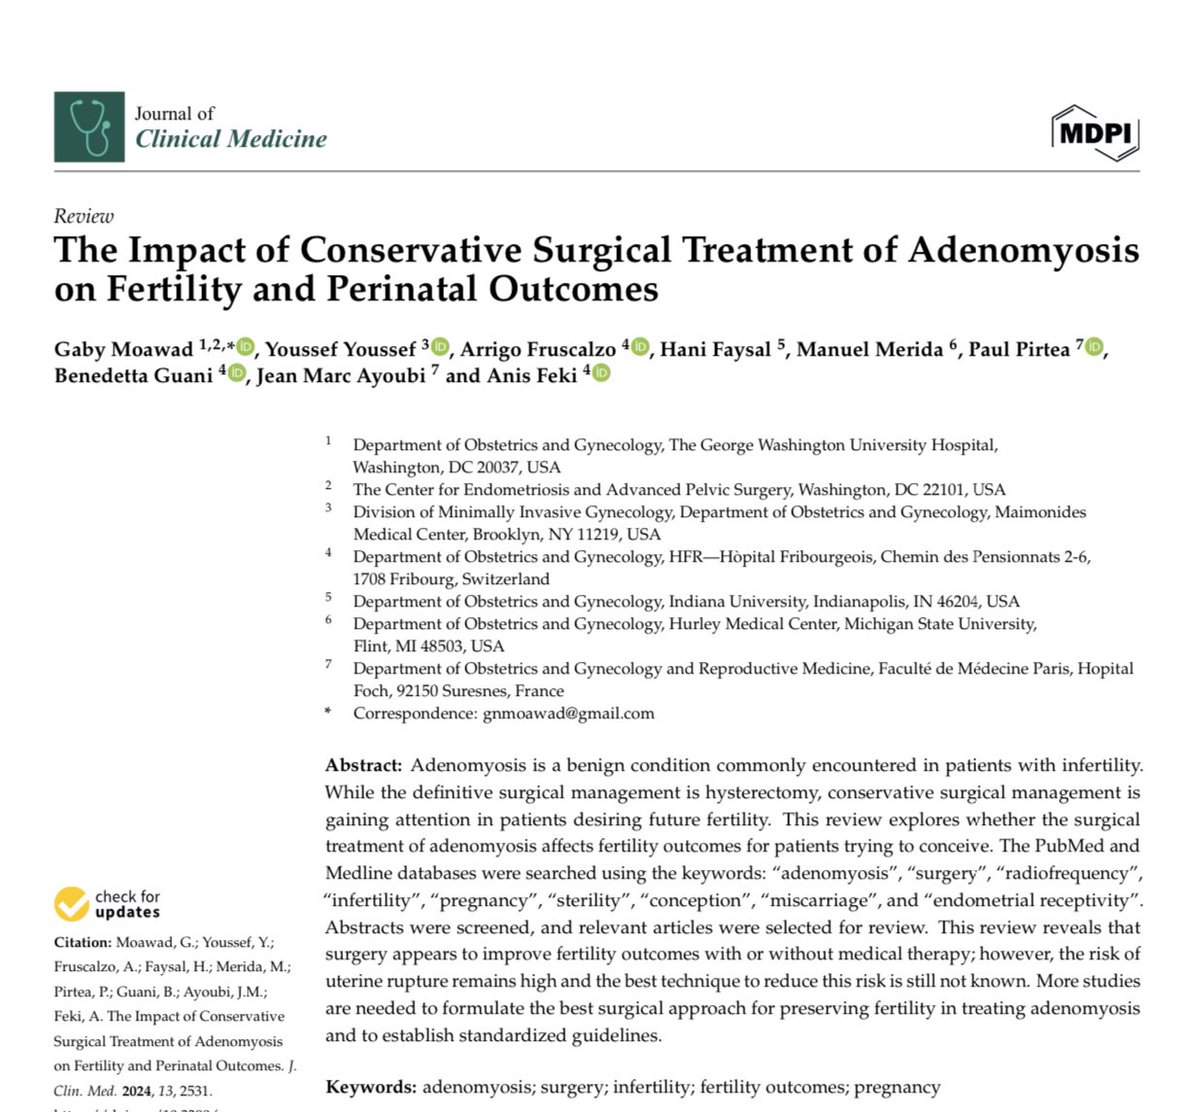 Adenomyosis Awareness Month! 🎗️

We're excited to share our latest article reviewing up-to-date literature on the outcomes of surgery for adenomyosis. Dive in to learn more about this important topic and spread the word to increase awareness!

mdpi.com/2077-0383/13/9…